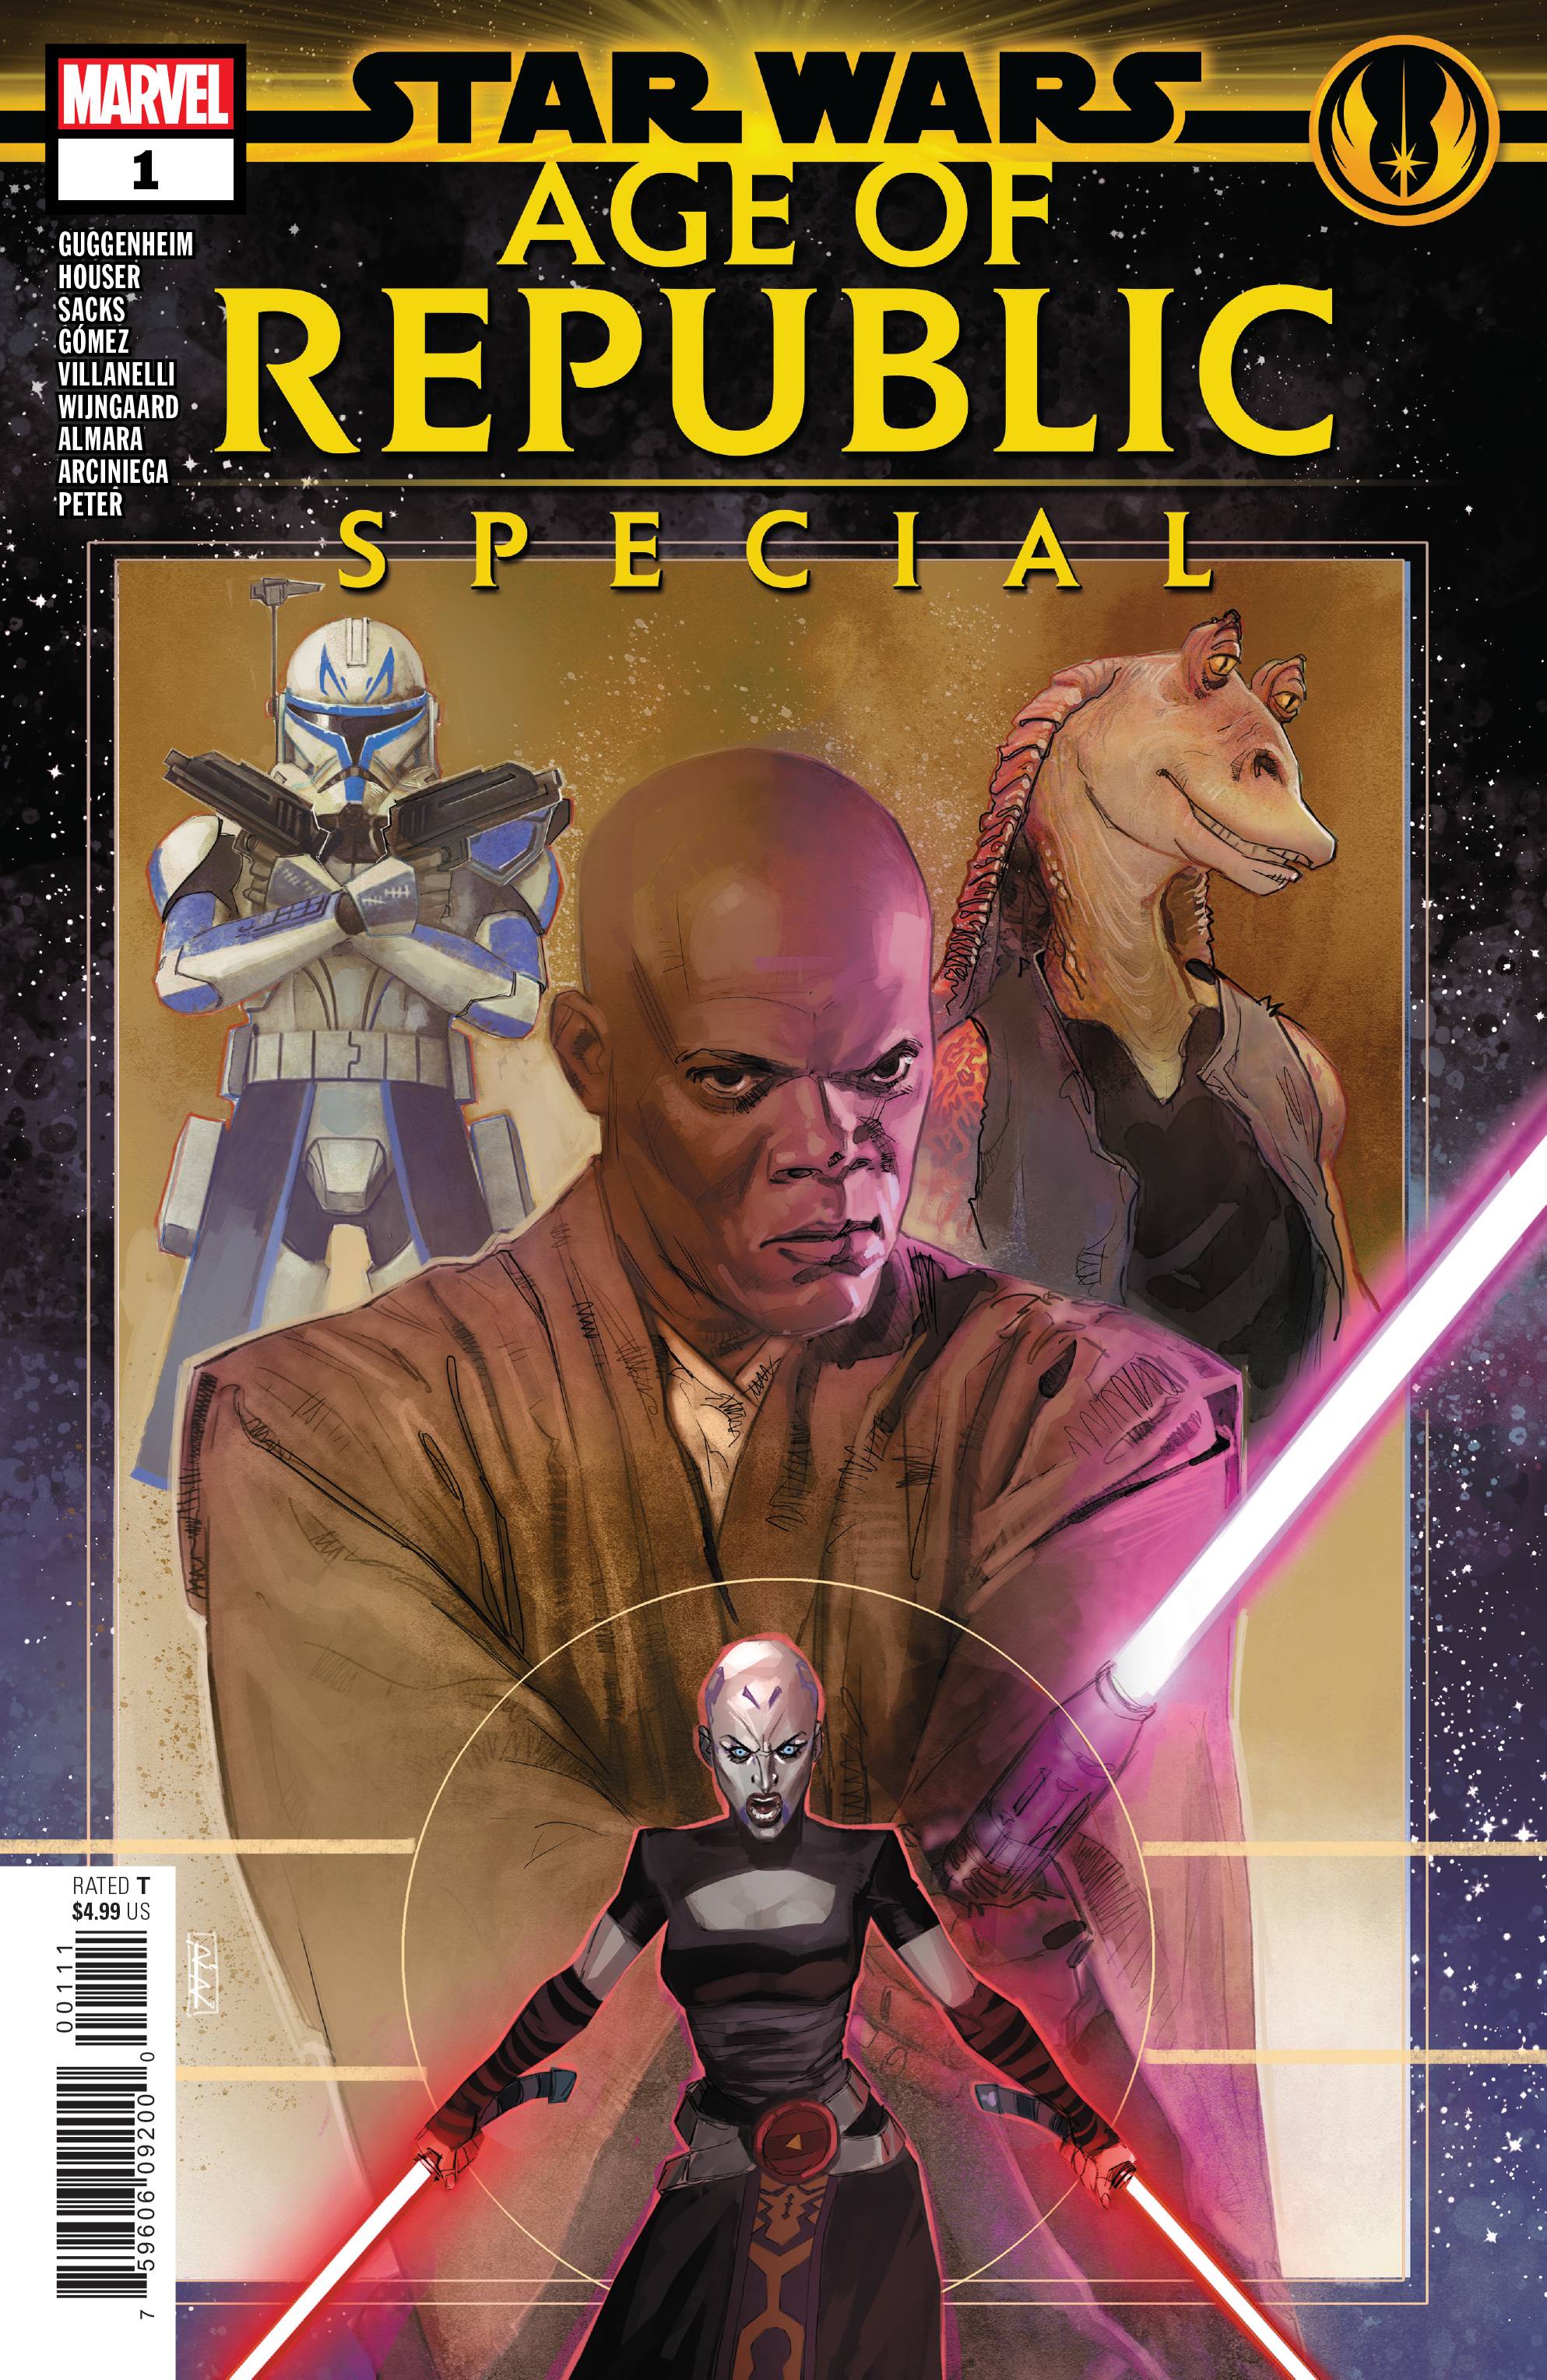 Star Wars Age of Republic Special #1